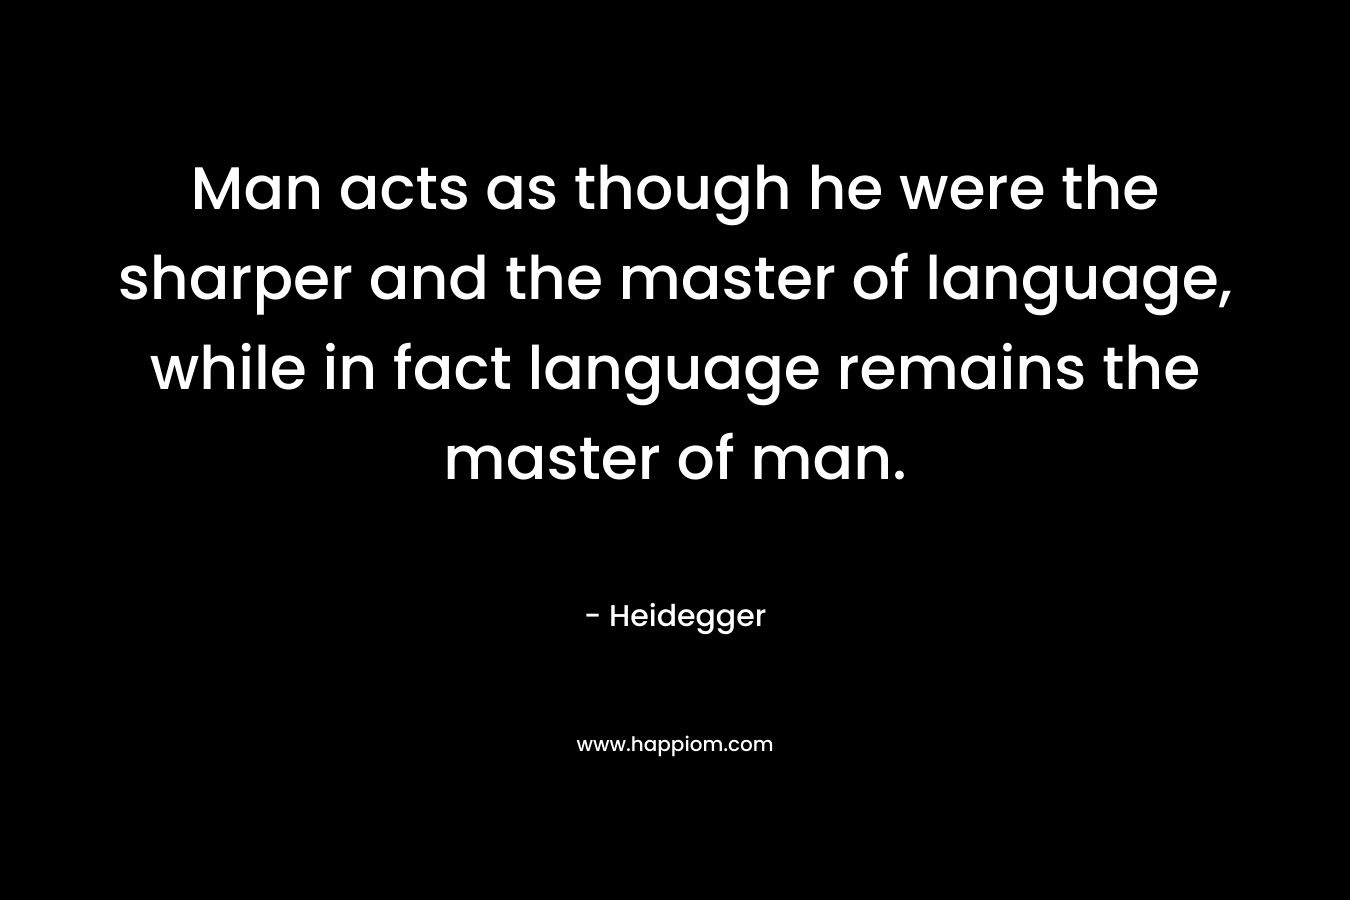 Man acts as though he were the sharper and the master of language, while in fact language remains the master of man.